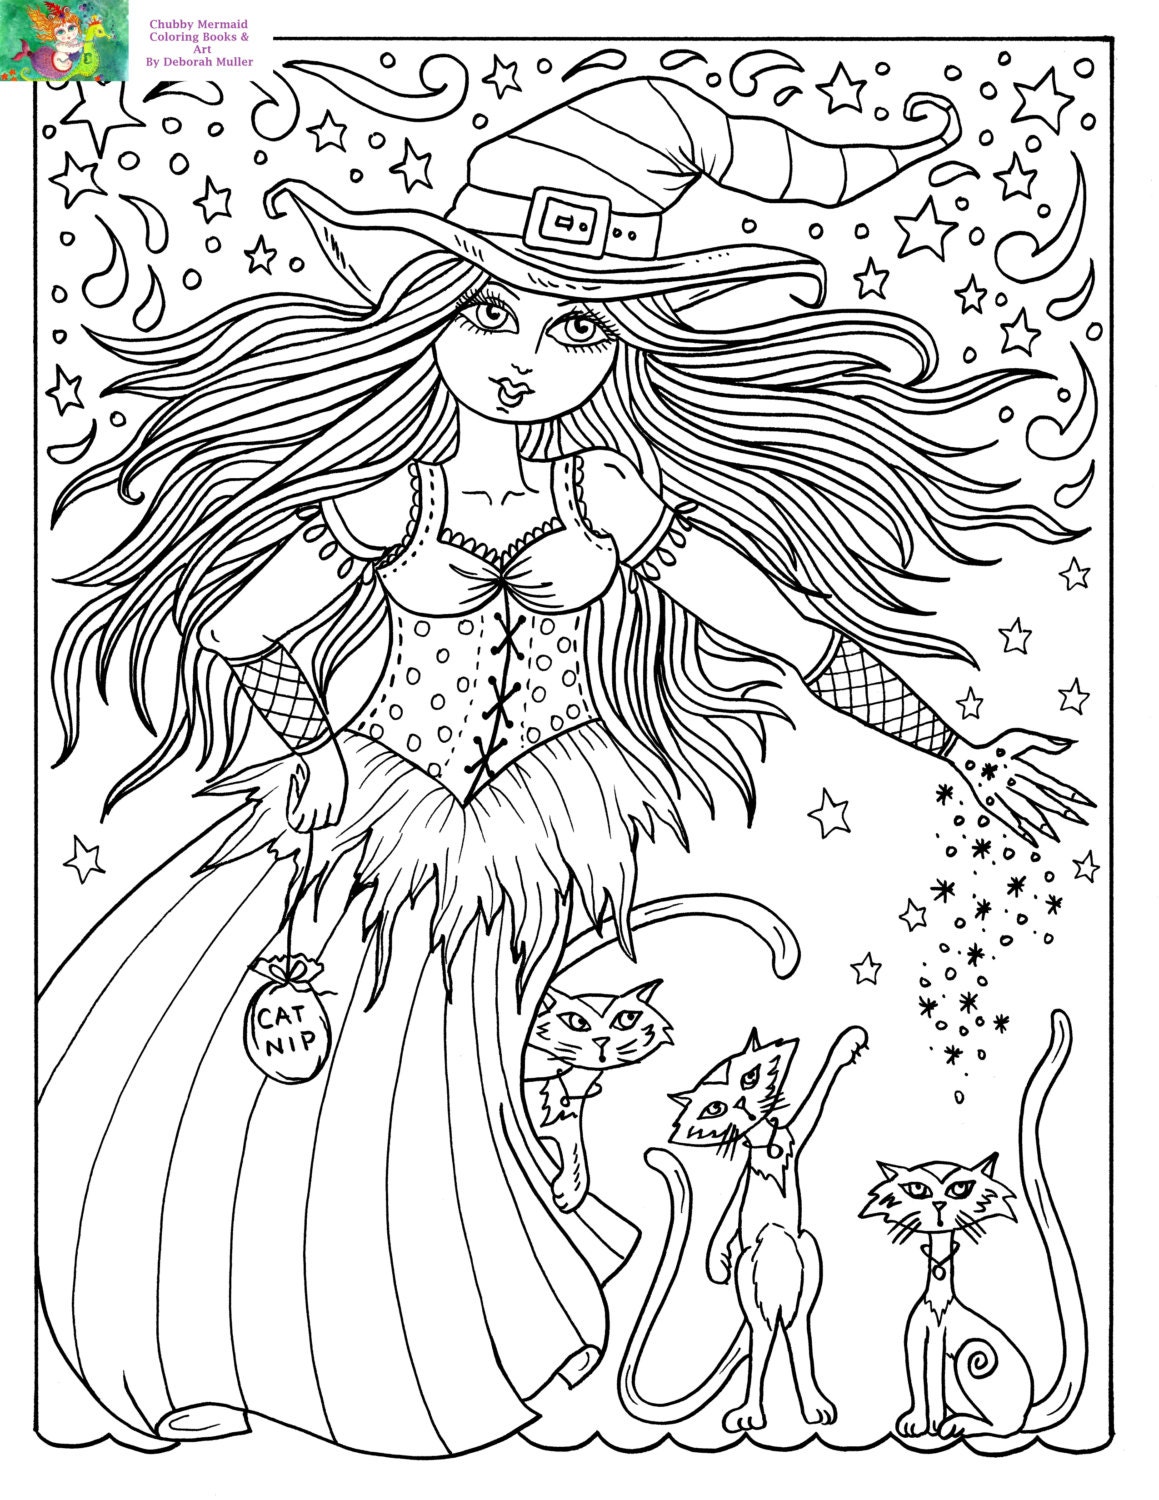 Downloadable coloring page witch and cats halloween fun coloring books adultsdigitaldigistampscat